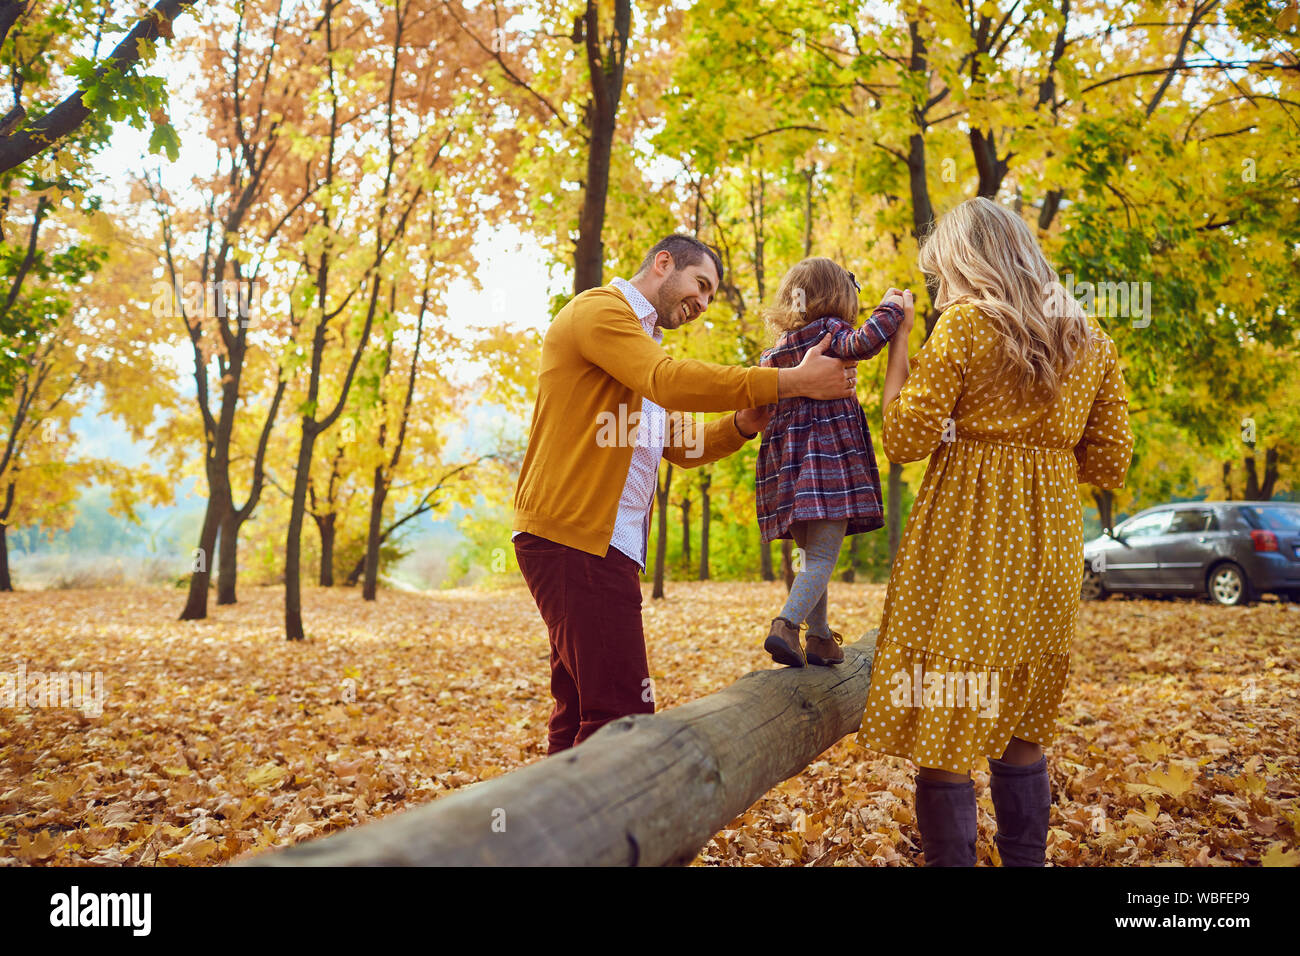 Family playing with their daughter on nature in the fall Stock Photo